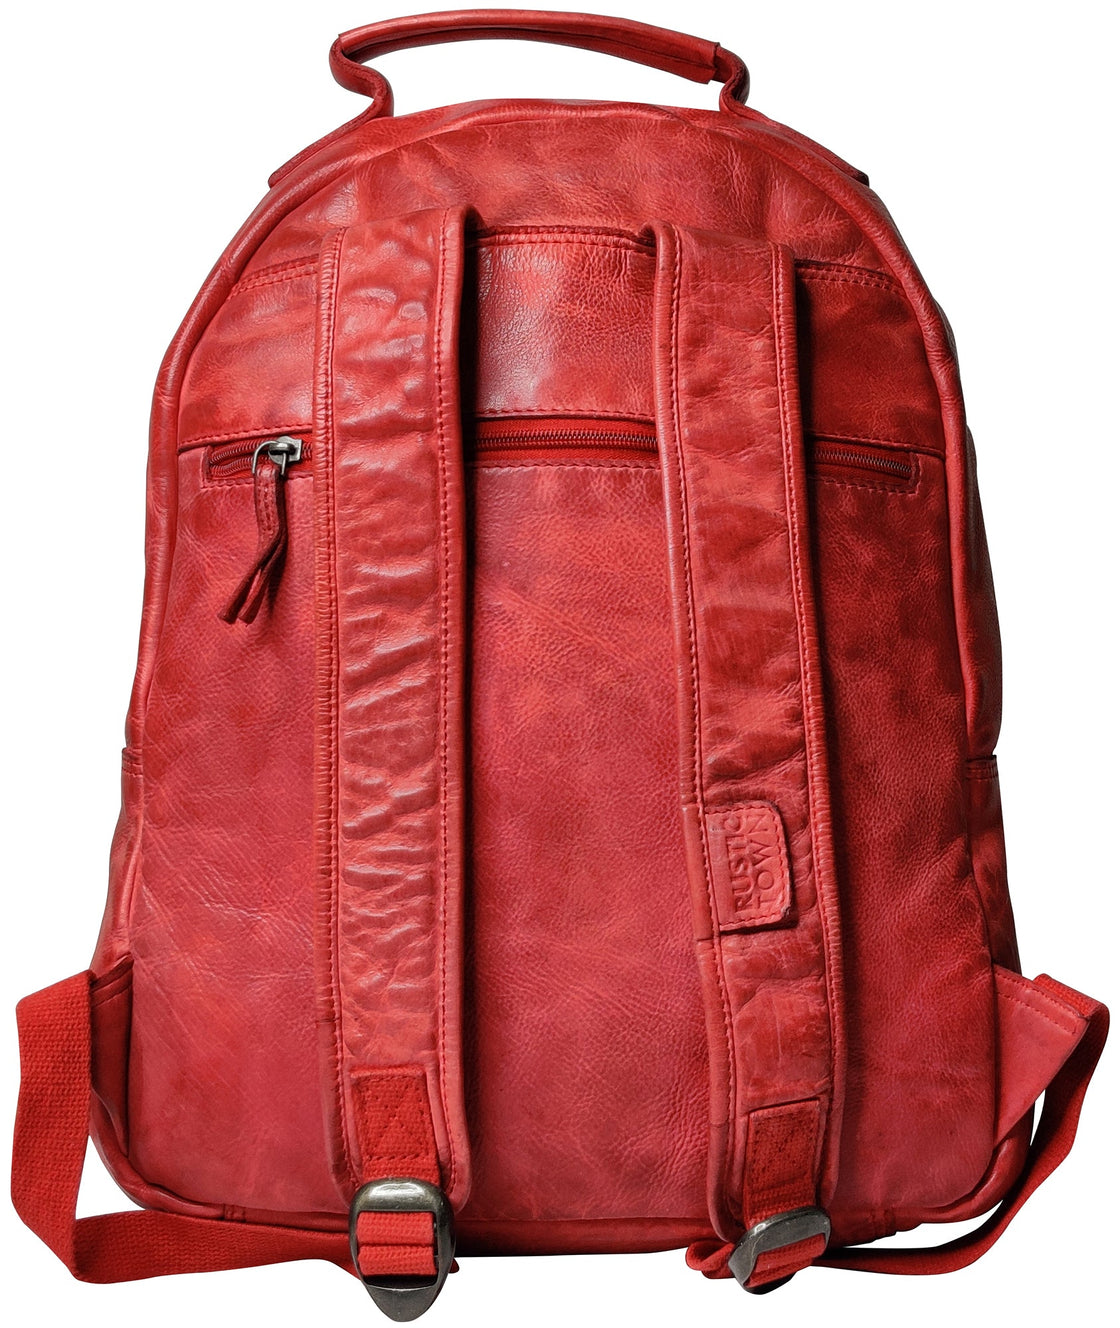 Leather Laptop Backpack for Women, Cherry